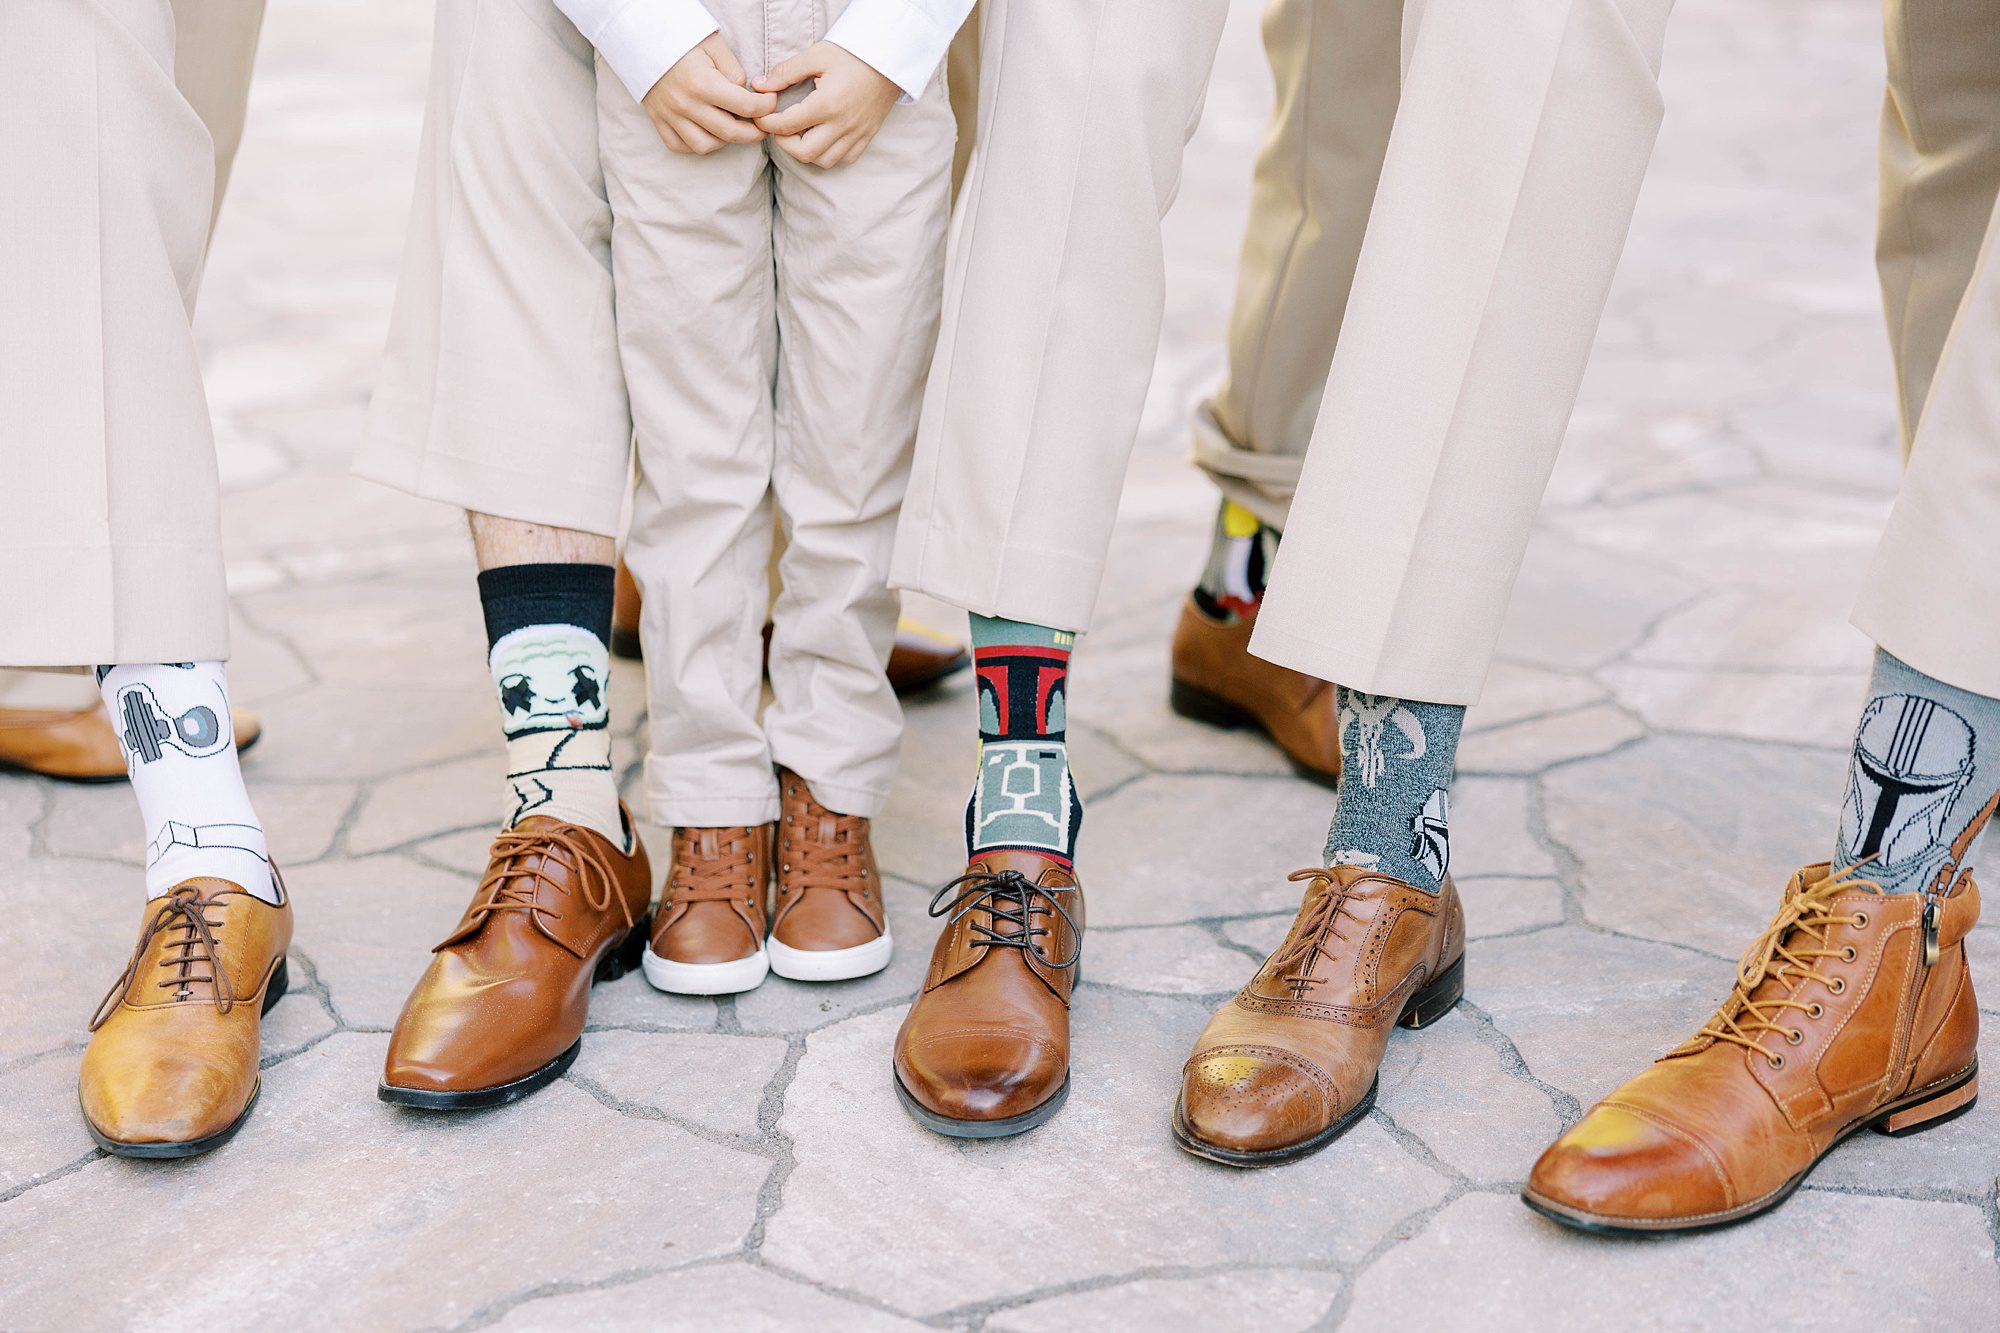 groom and groomsmen show off silly socks during FL wedding photos